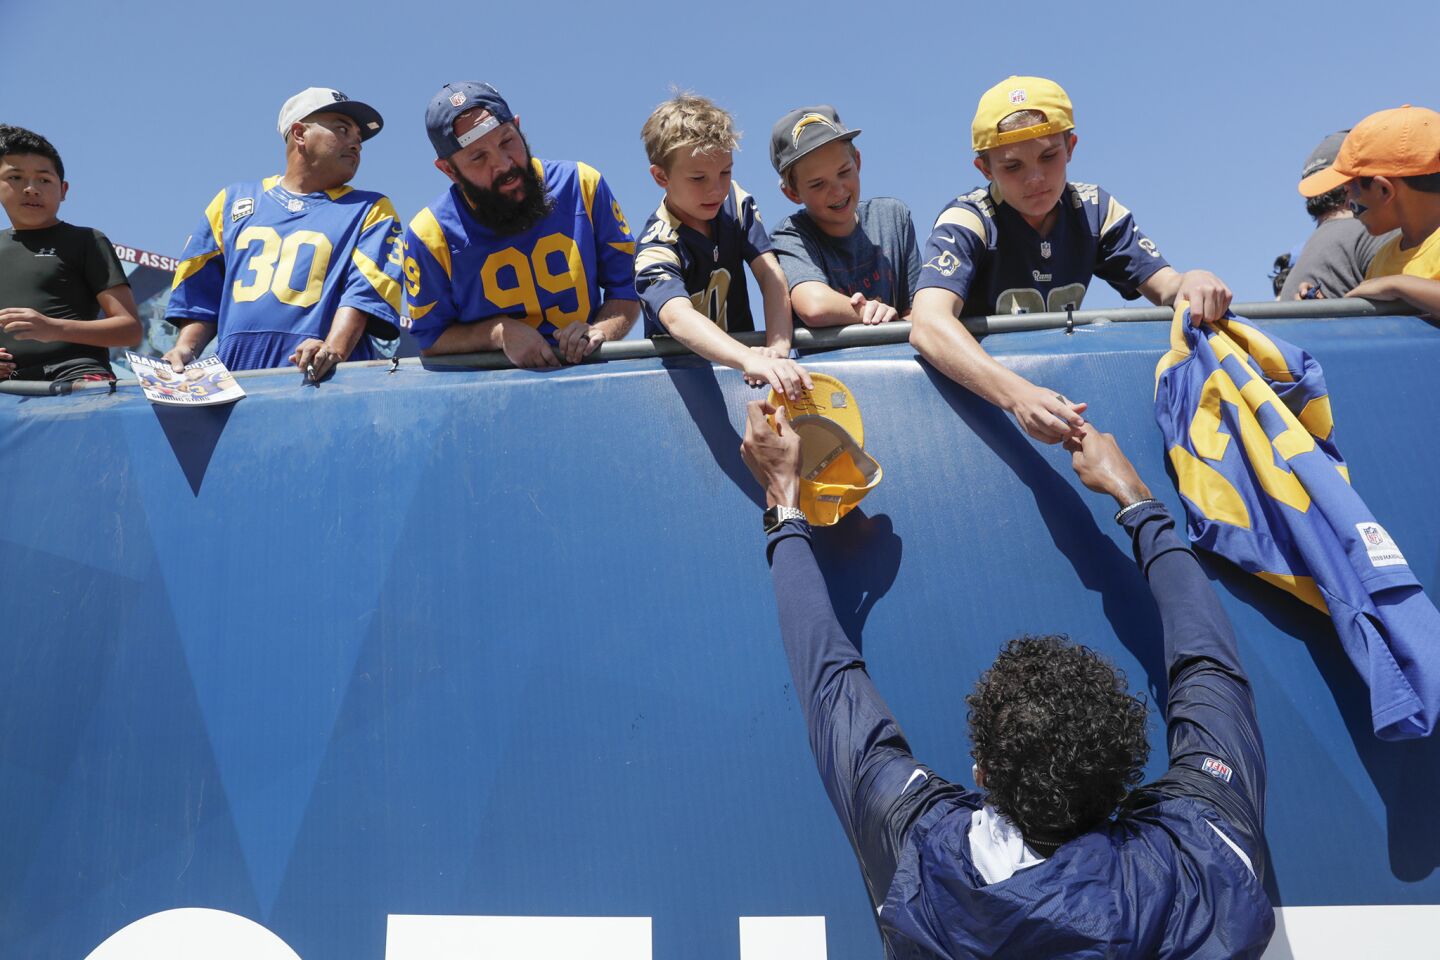 LOS ANGELES, CA, SUNDAY, SEPTEMBER 23, 2018 - Fans reach for an autograph from Rams receiver Josh Reynolds before a game against the Chargers at the Coliseum.